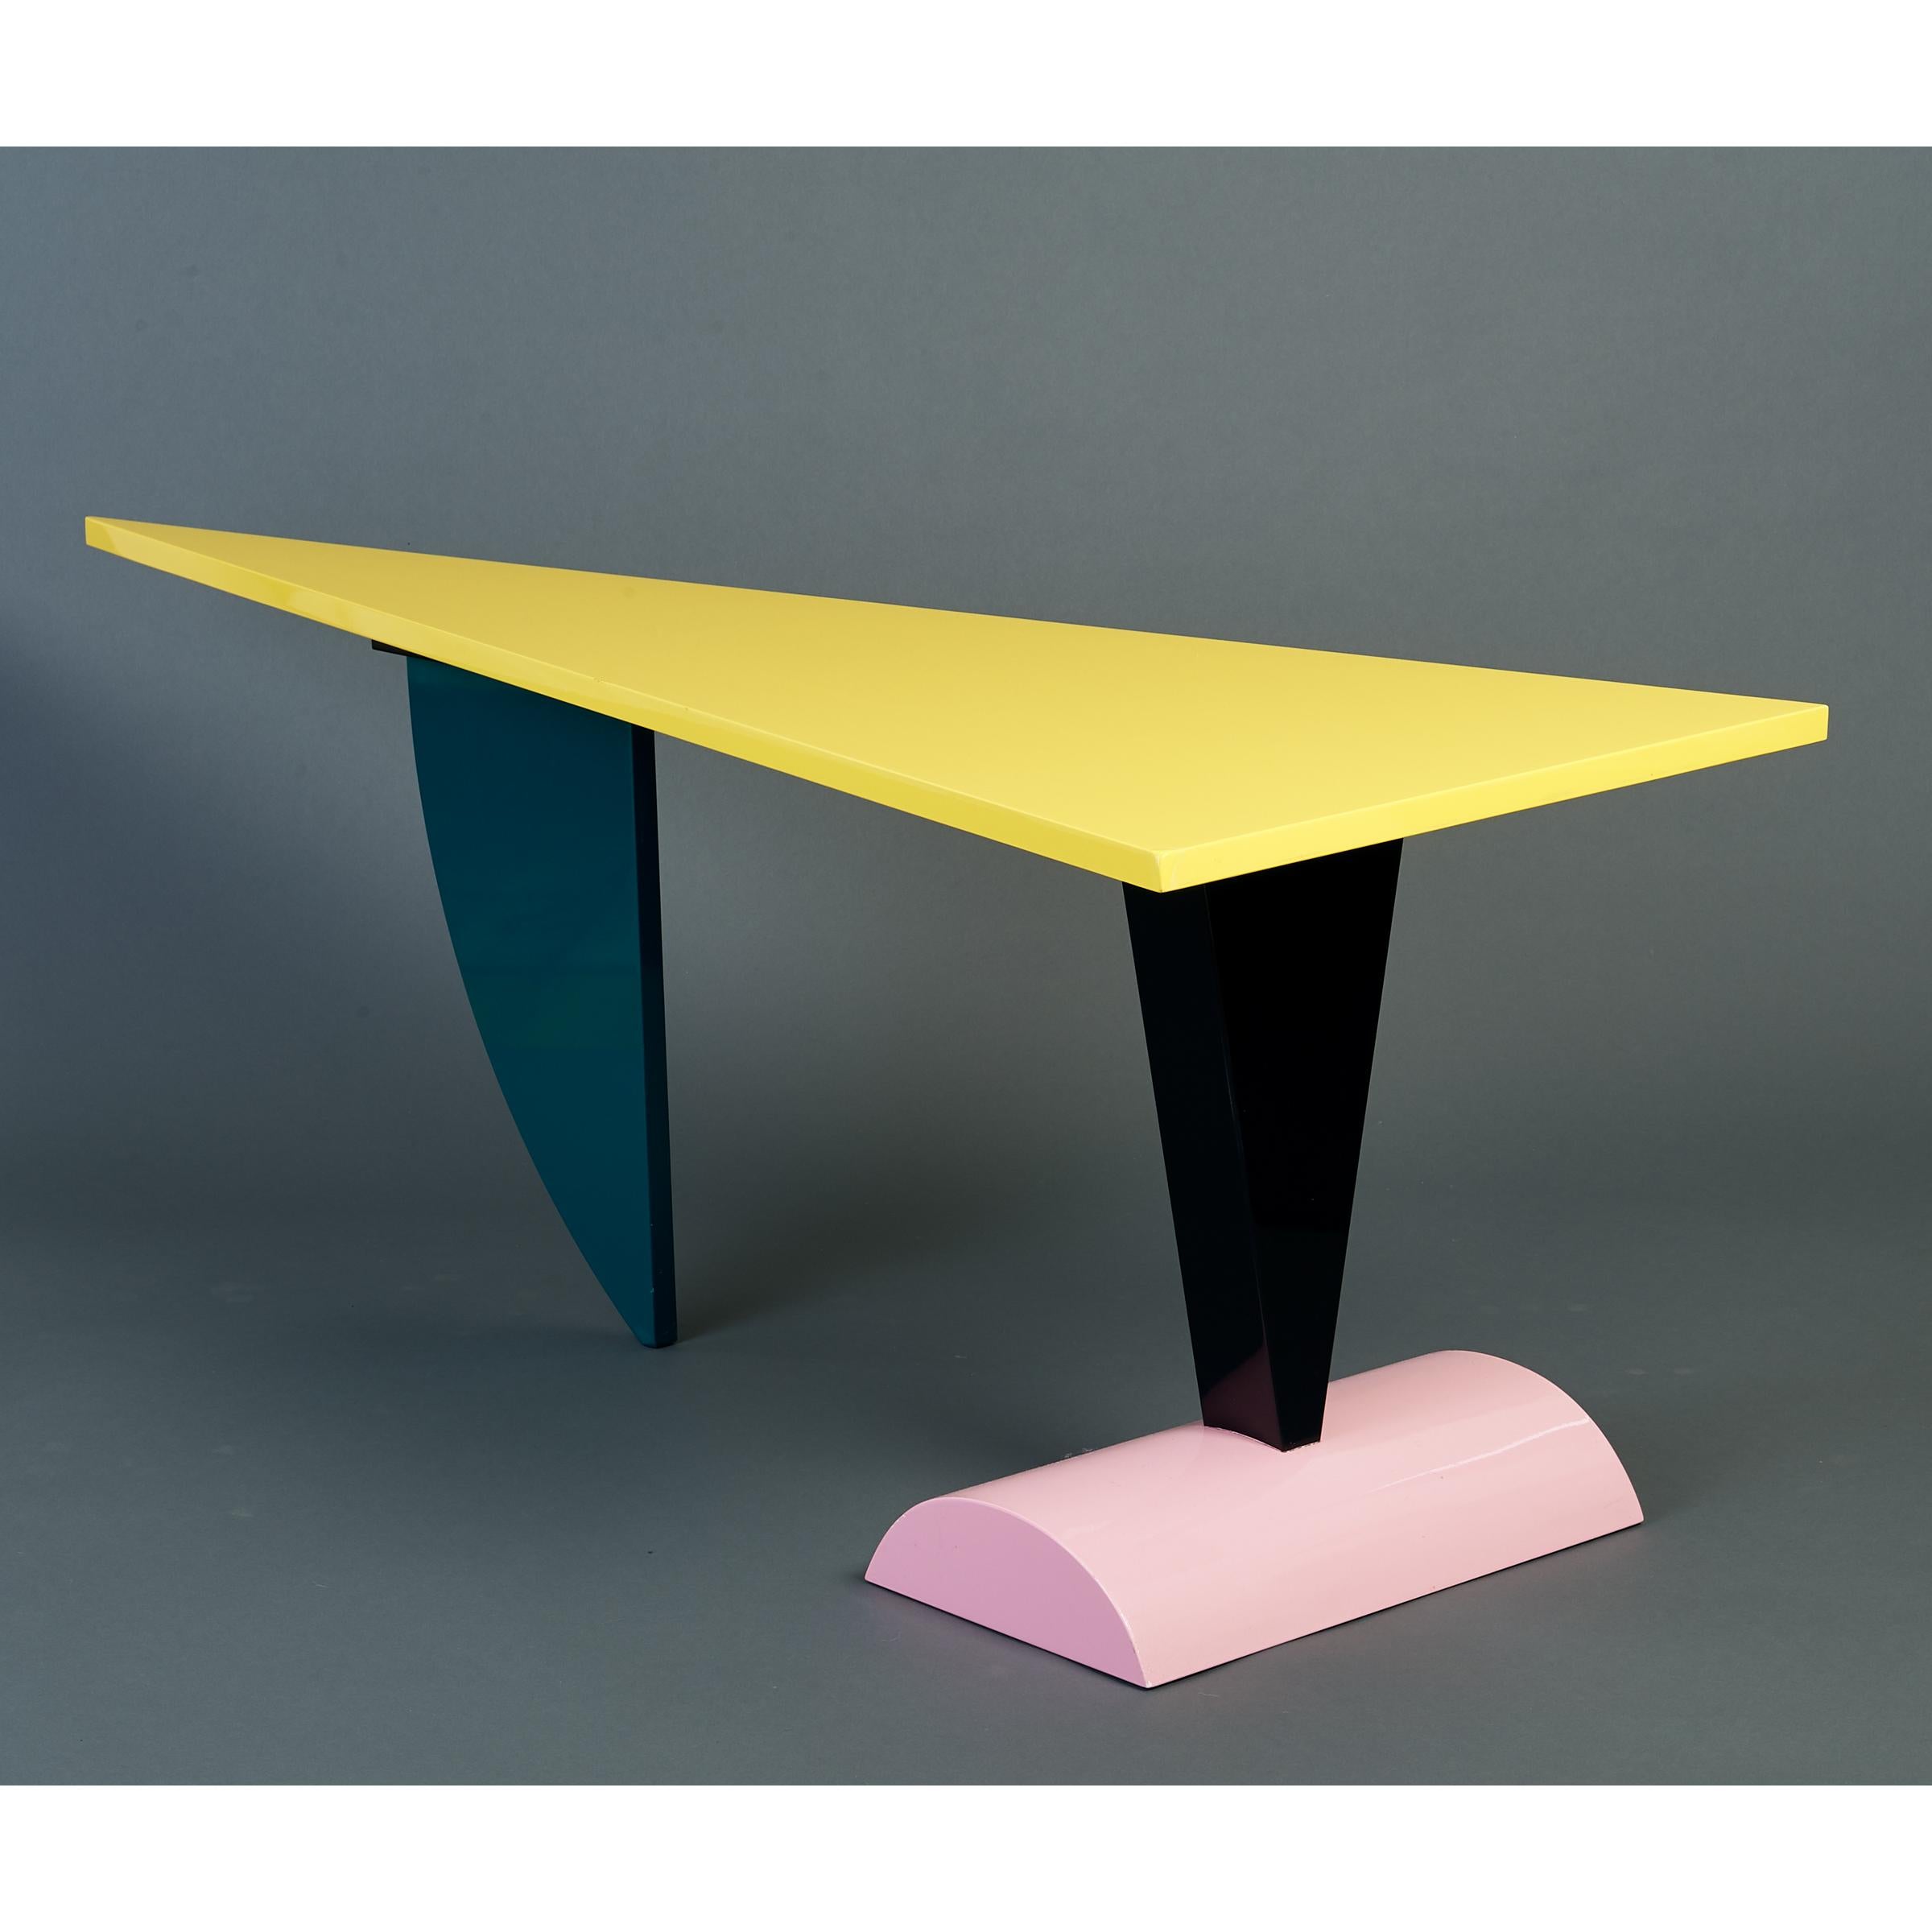 Peter Shire: Original Memphis Milano Brazil Table in Lacquered Wood, Italy 1981 (Holz) im Angebot